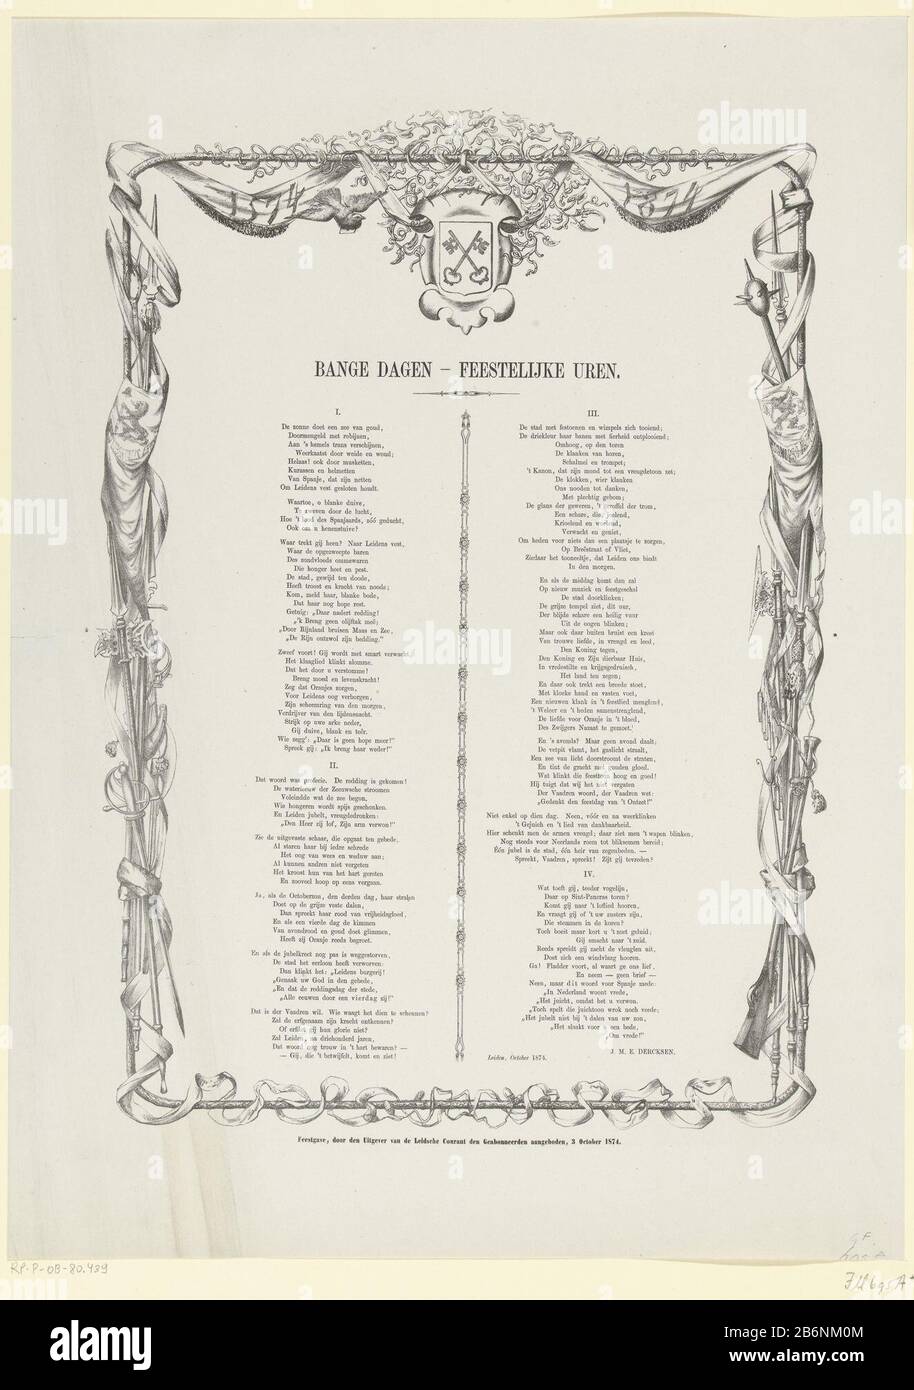 Gedicht bij de herdenking van het ontzet van Leiden in 1874 Bange dagen - Feestelijke uren (titel op object) Poem at the commemoration of the liberation of Leiden in 1874Bange days - Celebratory hours (title object) Property Type: text sheet Item number: RP-P-OB-80.439Catalogusreferentie: FMH 695-A * Note: (added number RPK) Description: Poem Bange days - Celebratory hours, at the commemoration of the liberation of Leiden 3 October 1874. Poem in verses I-IV, in frame of weapons and banners and crowned with the coat of arms of Leiden. Party Edition Leidsche Courant for its subscribers at the 30 Stock Photo